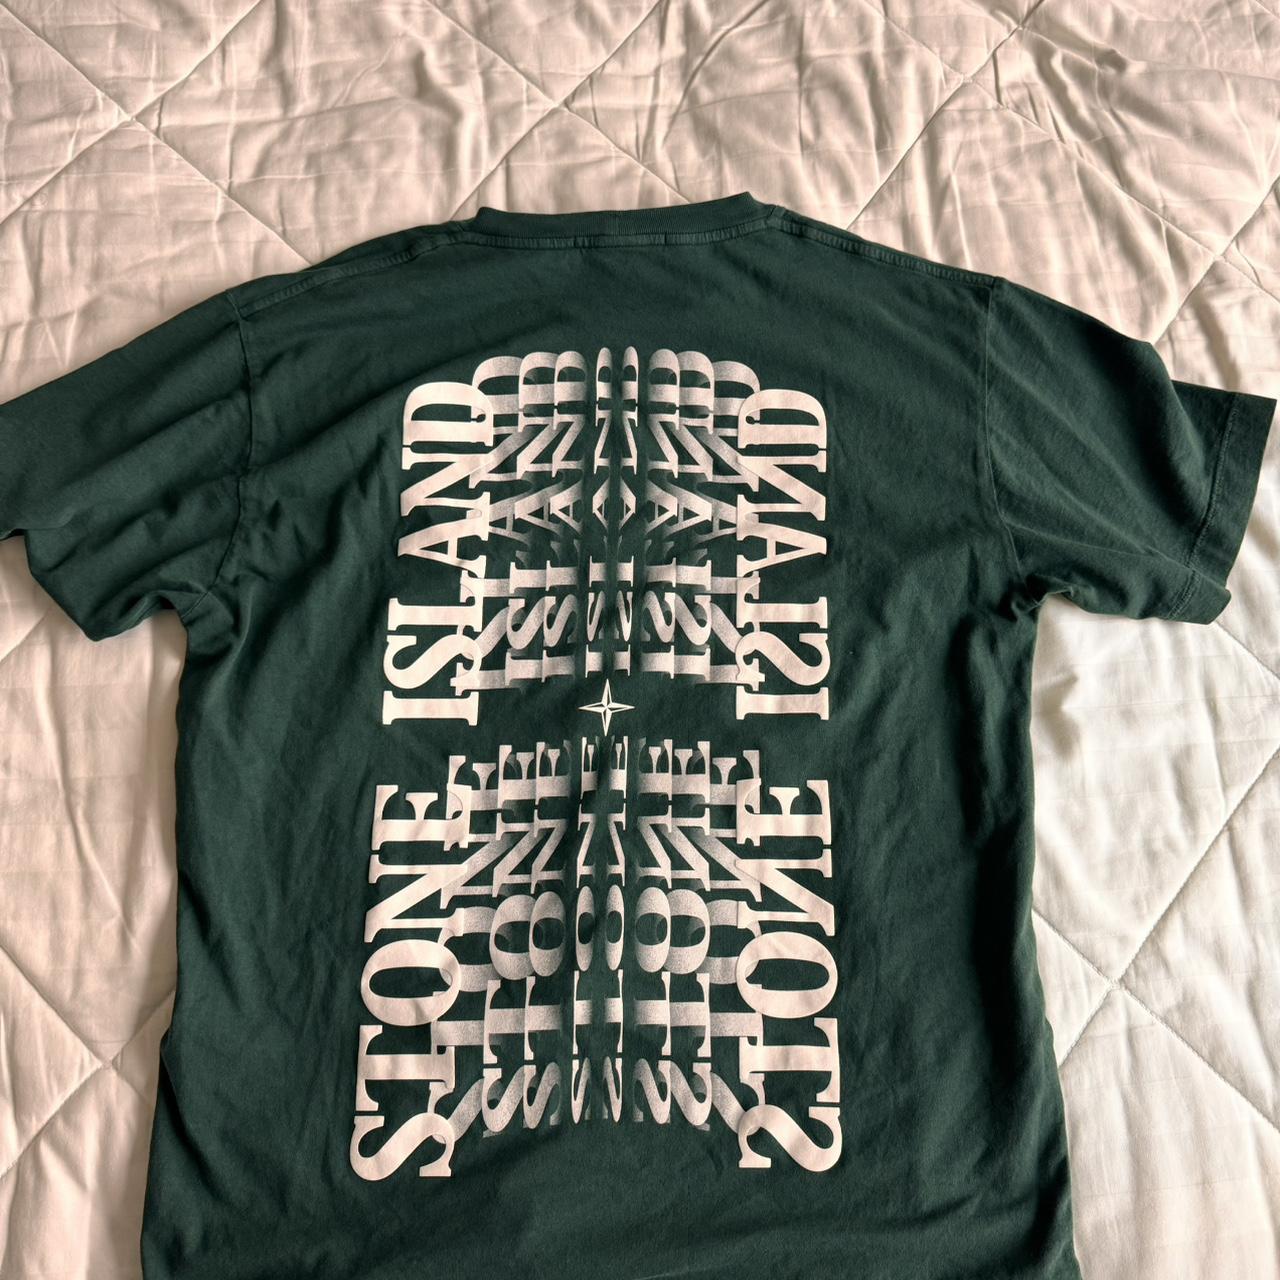 Stone island green t-shirt. Size small and worn once. - Depop